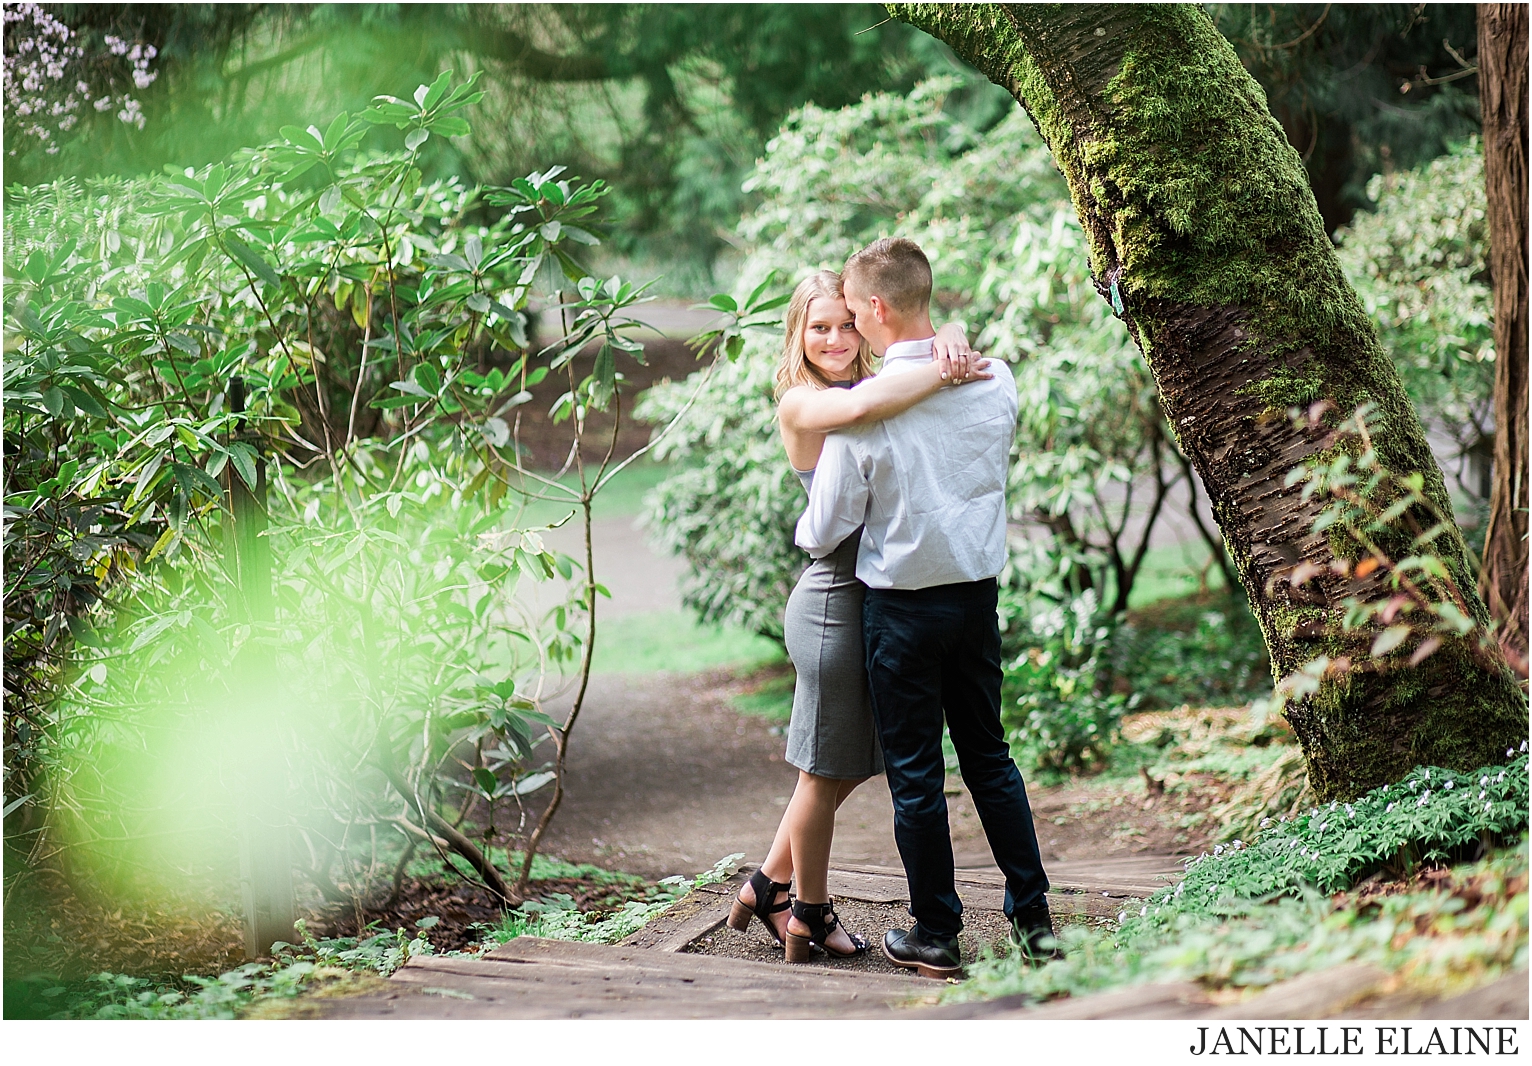 tricia and nate engagement photos-janelle elaine photography-38.jpg